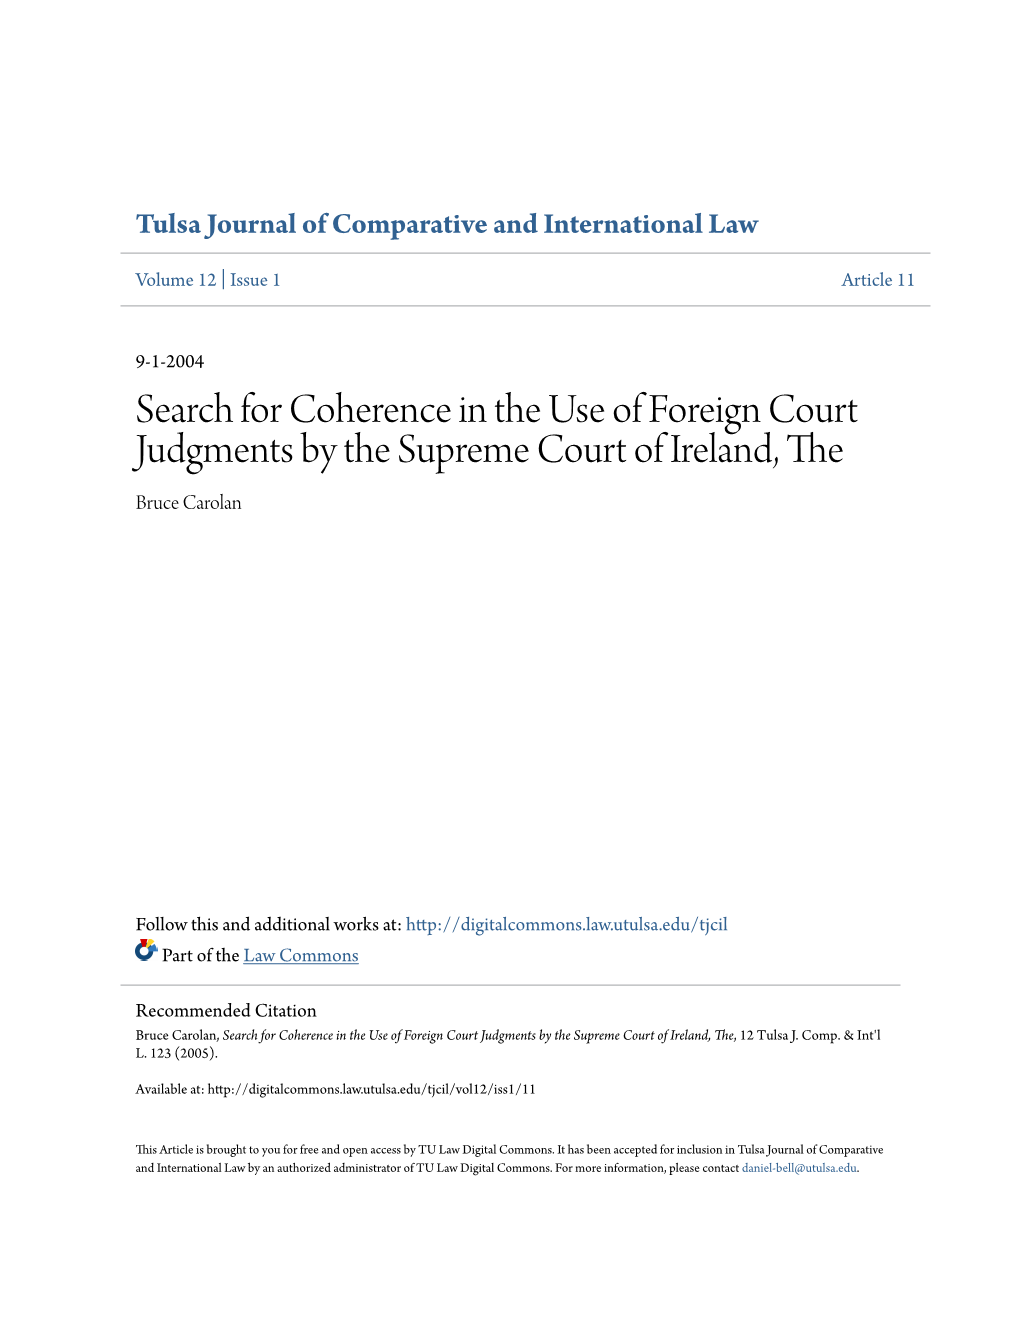 Search for Coherence in the Use of Foreign Court Judgments by the Supreme Court of Ireland, the Bruce Carolan